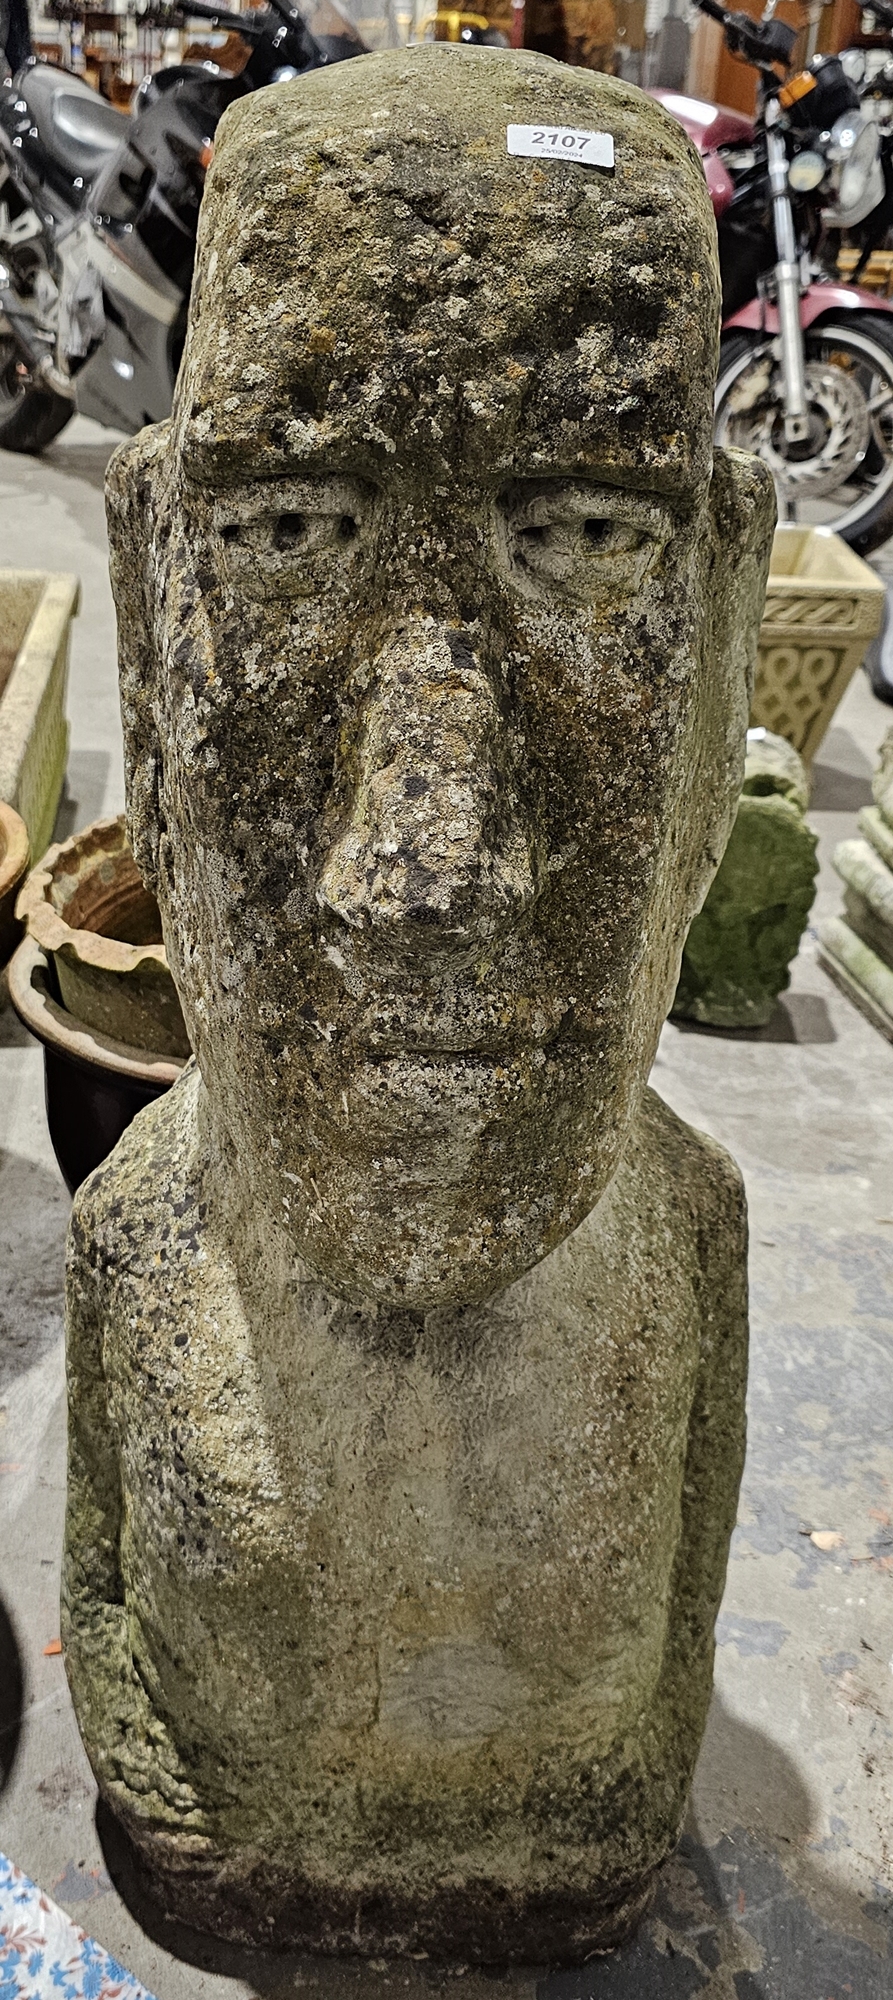 Composite stone figure in the style of a Moai/Easter Island head  Condition Report Request: